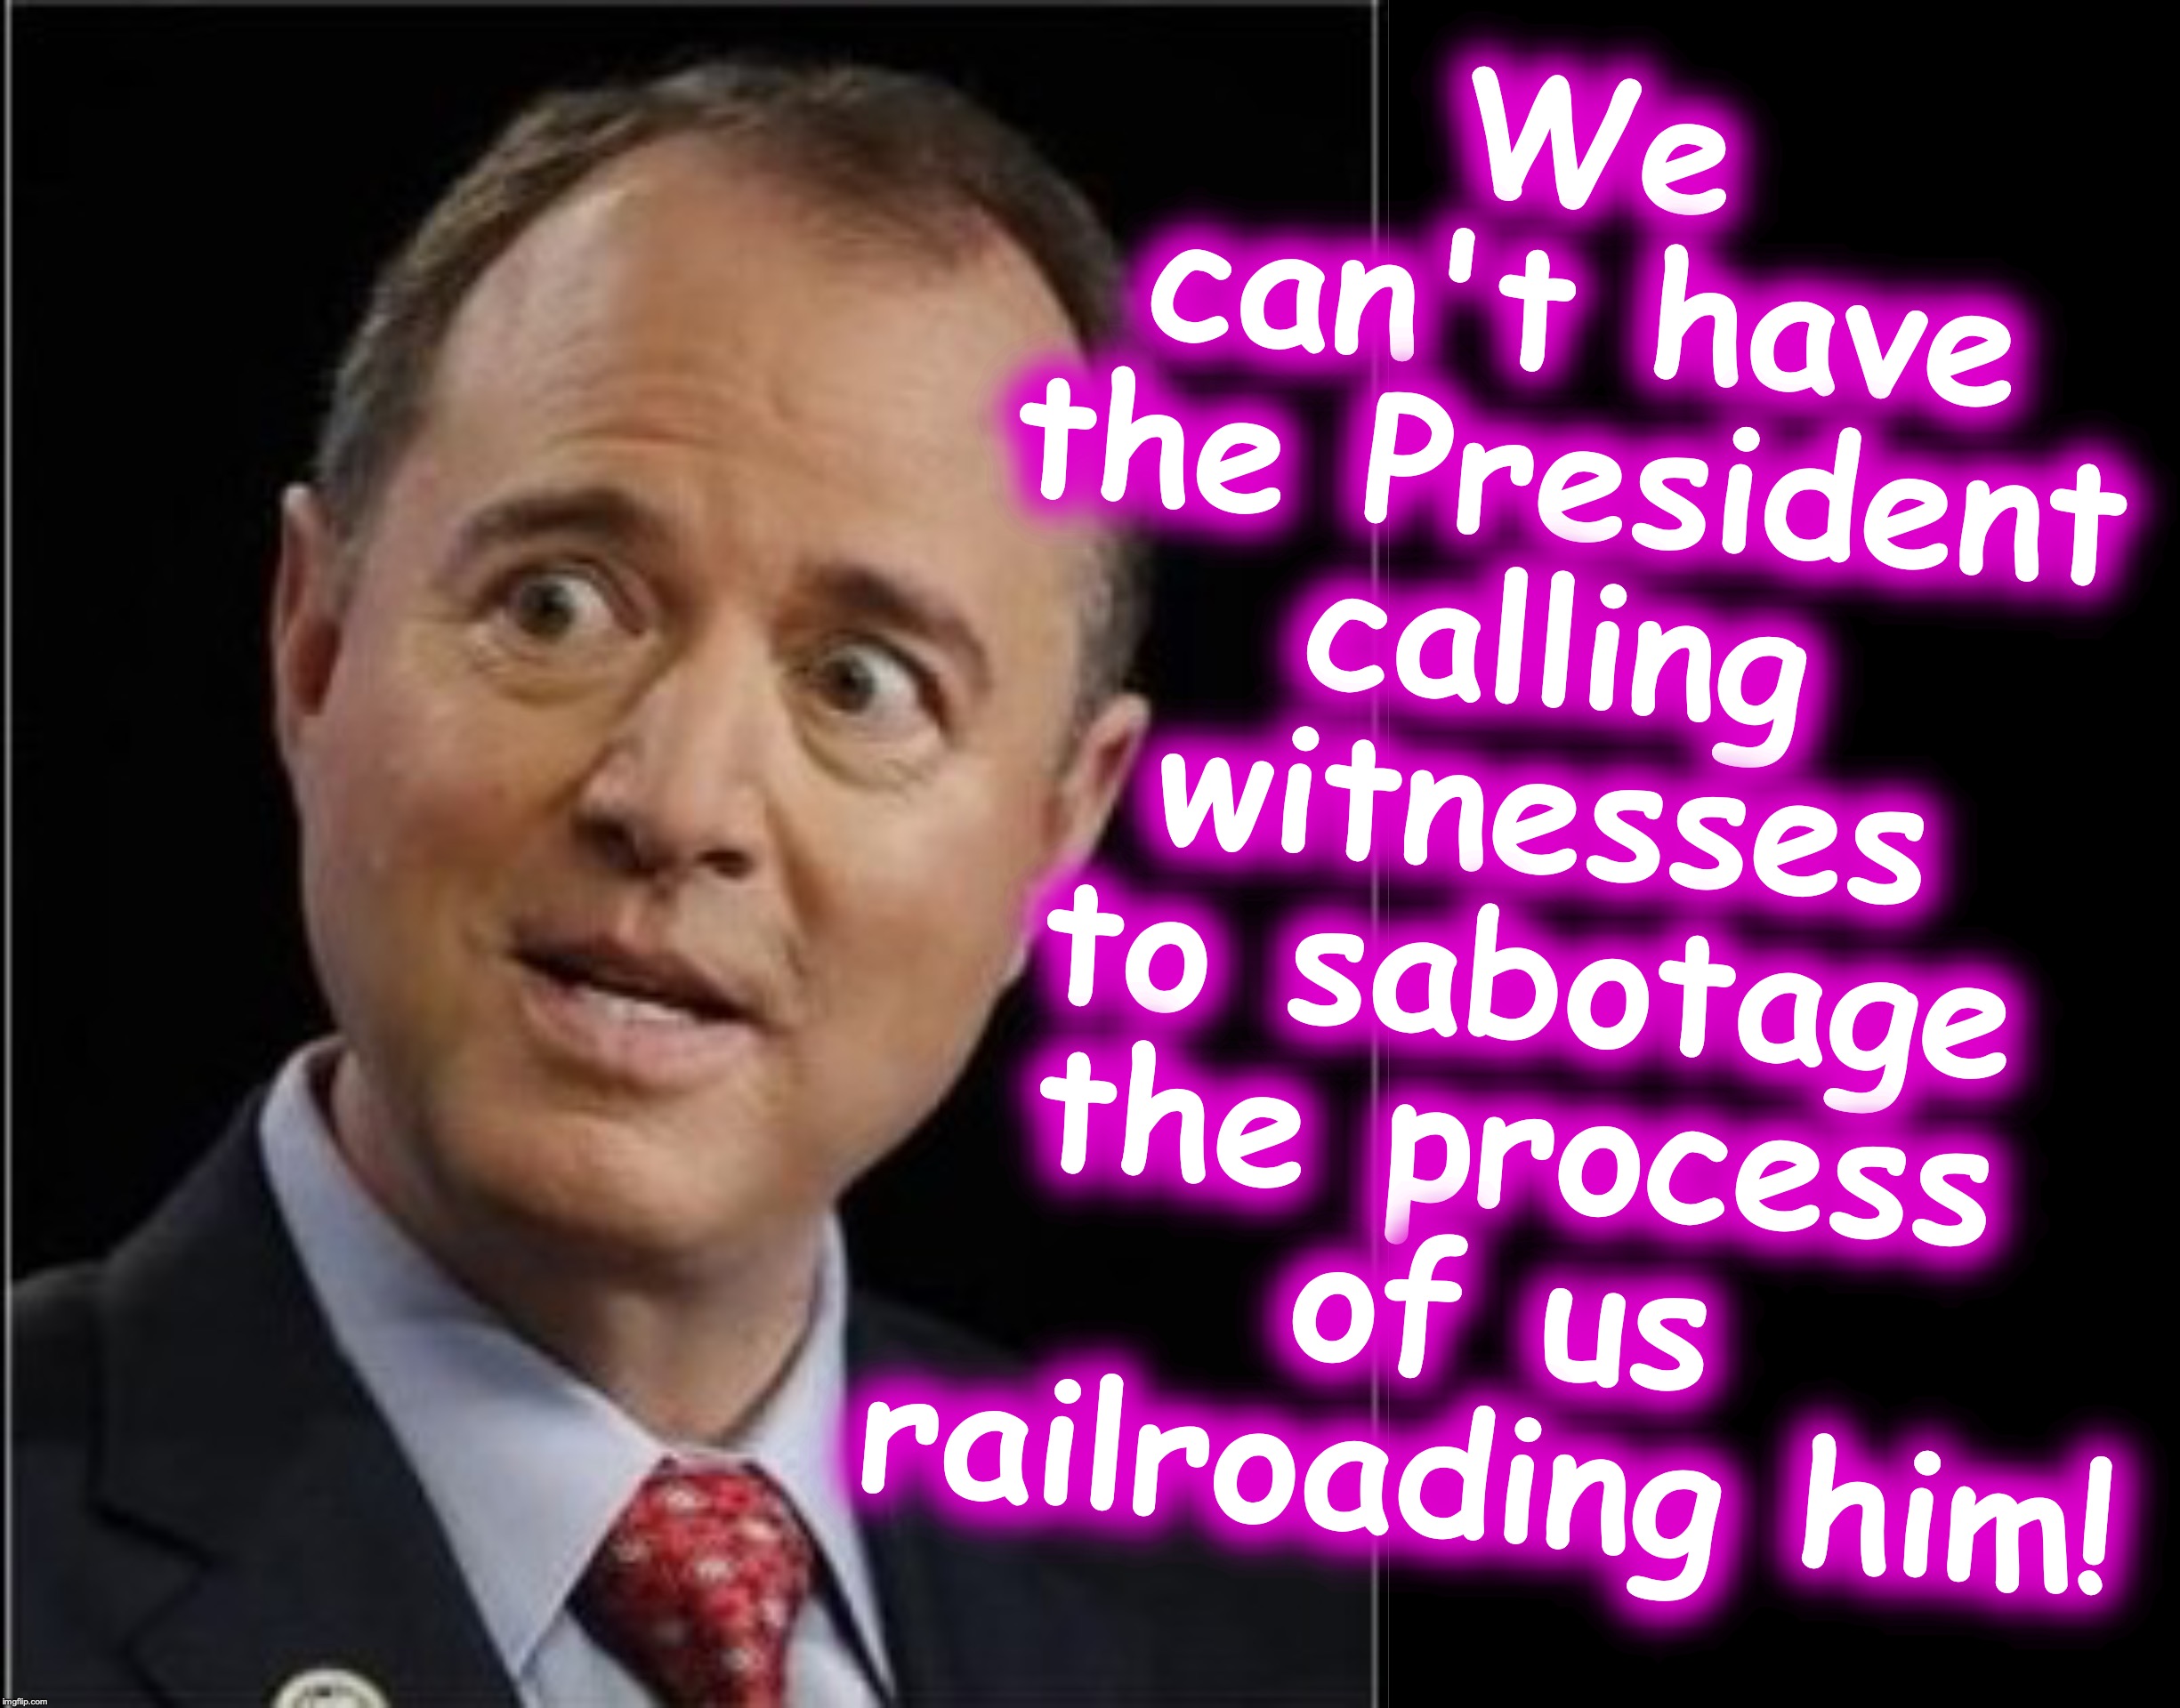 calling all kangaroos | We can't have the President calling witnesses to sabotage the process of us railroading him! | image tagged in black box,adam schiff | made w/ Imgflip meme maker